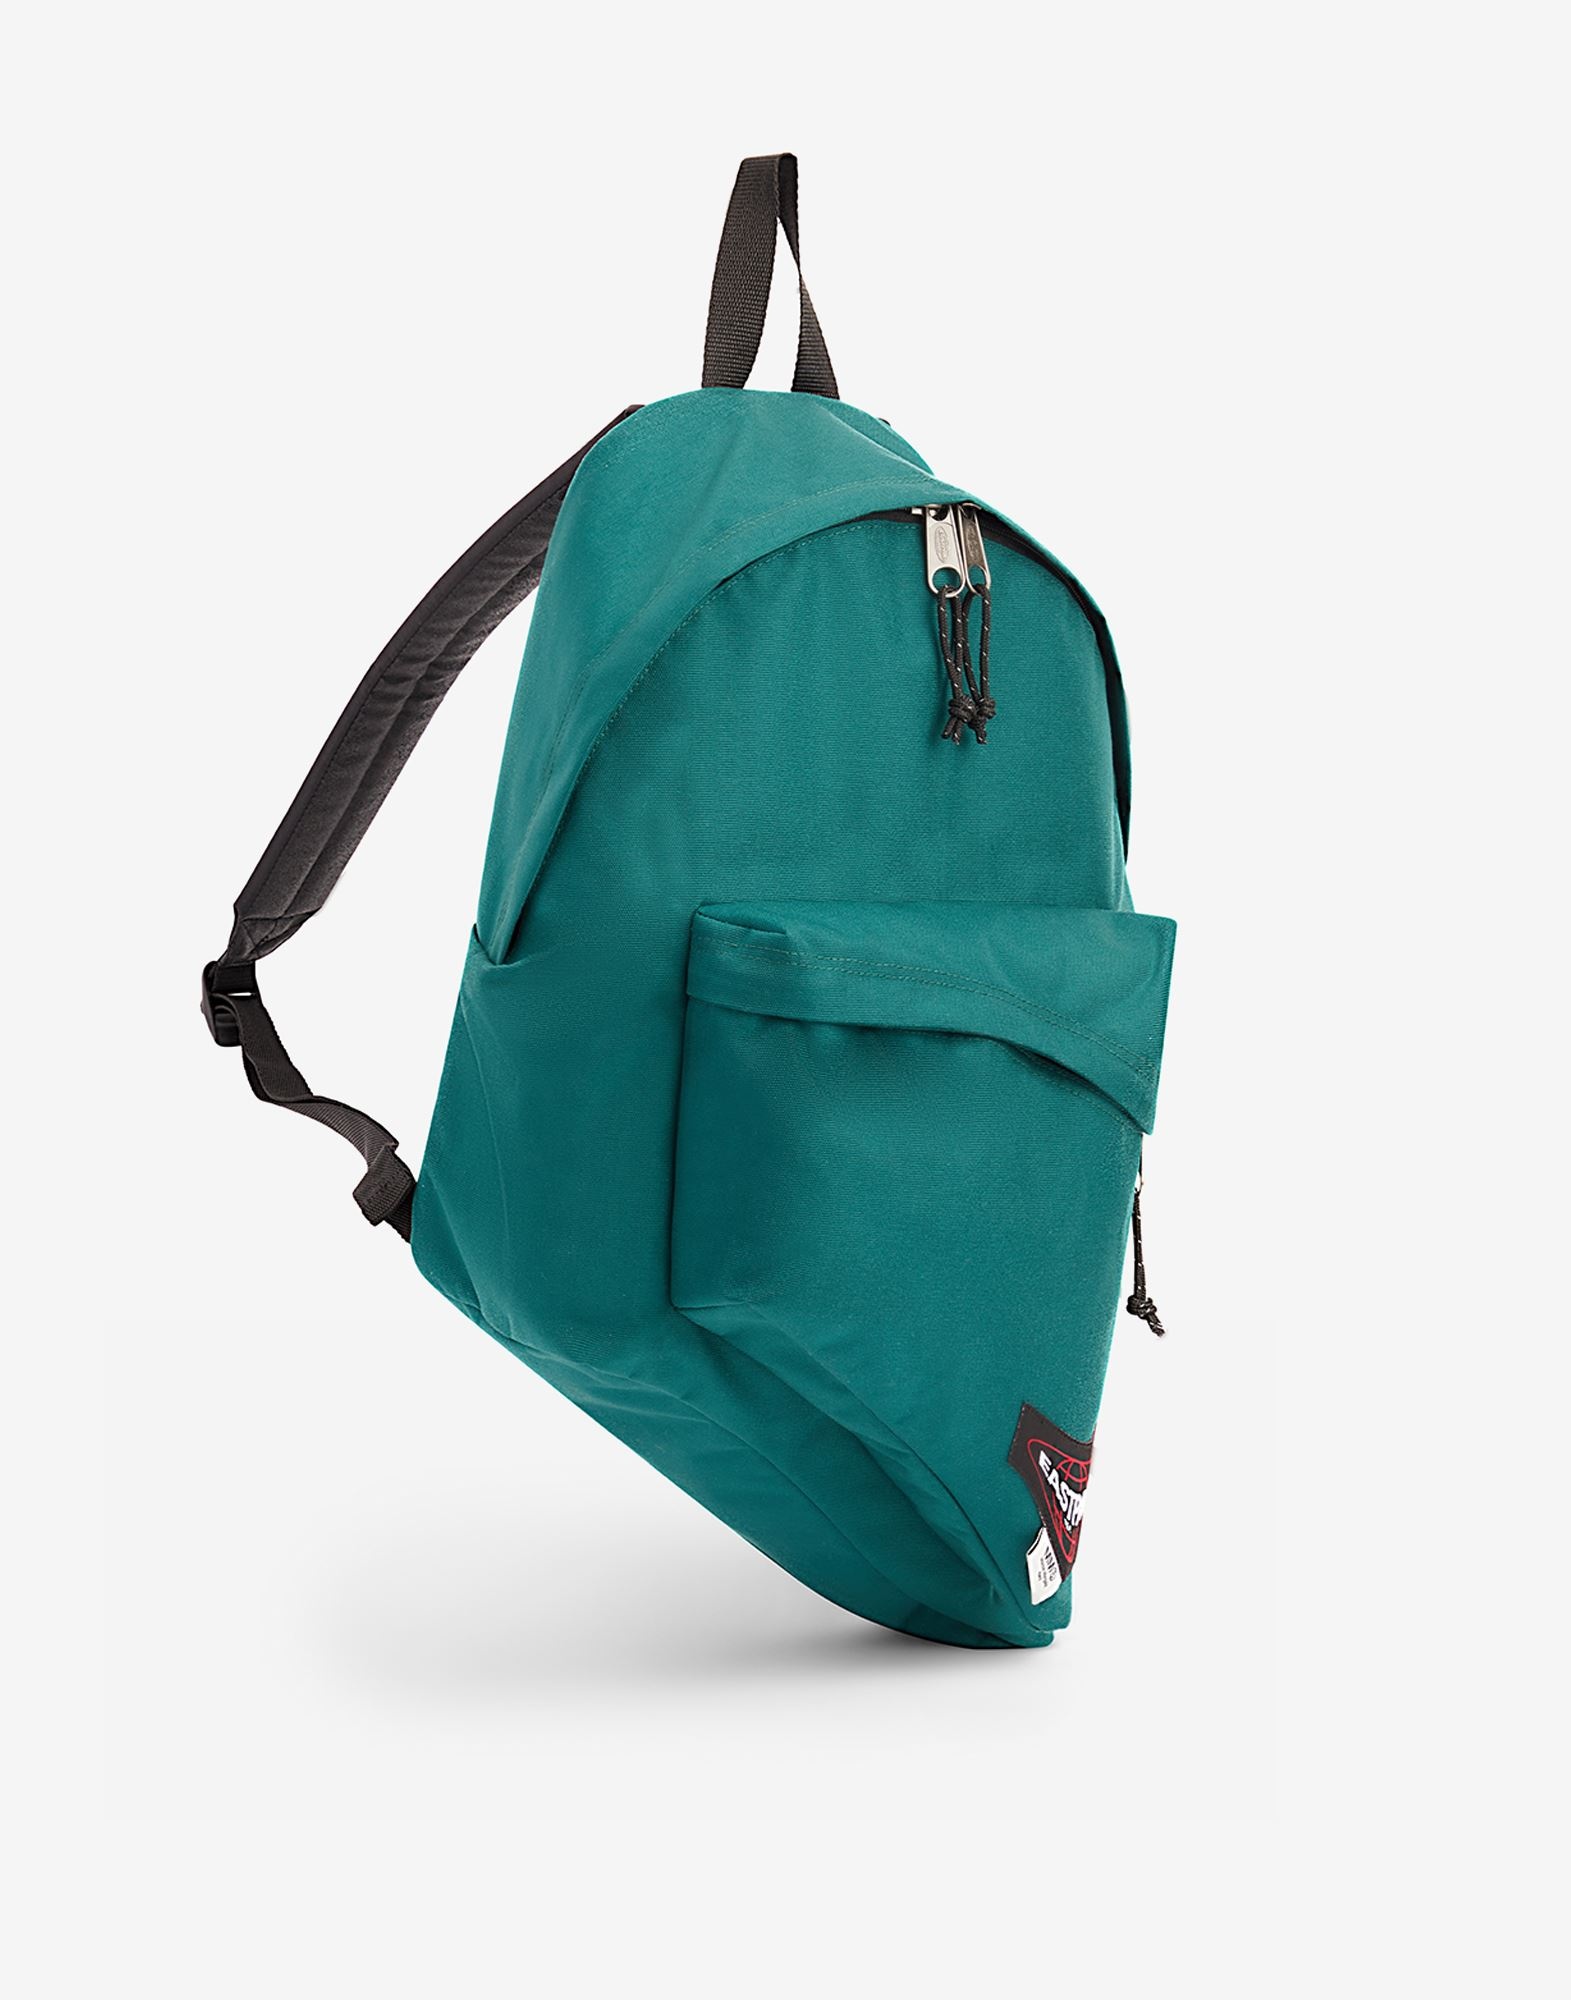 MM6 x Eastpak
Dripping Backpack - 2